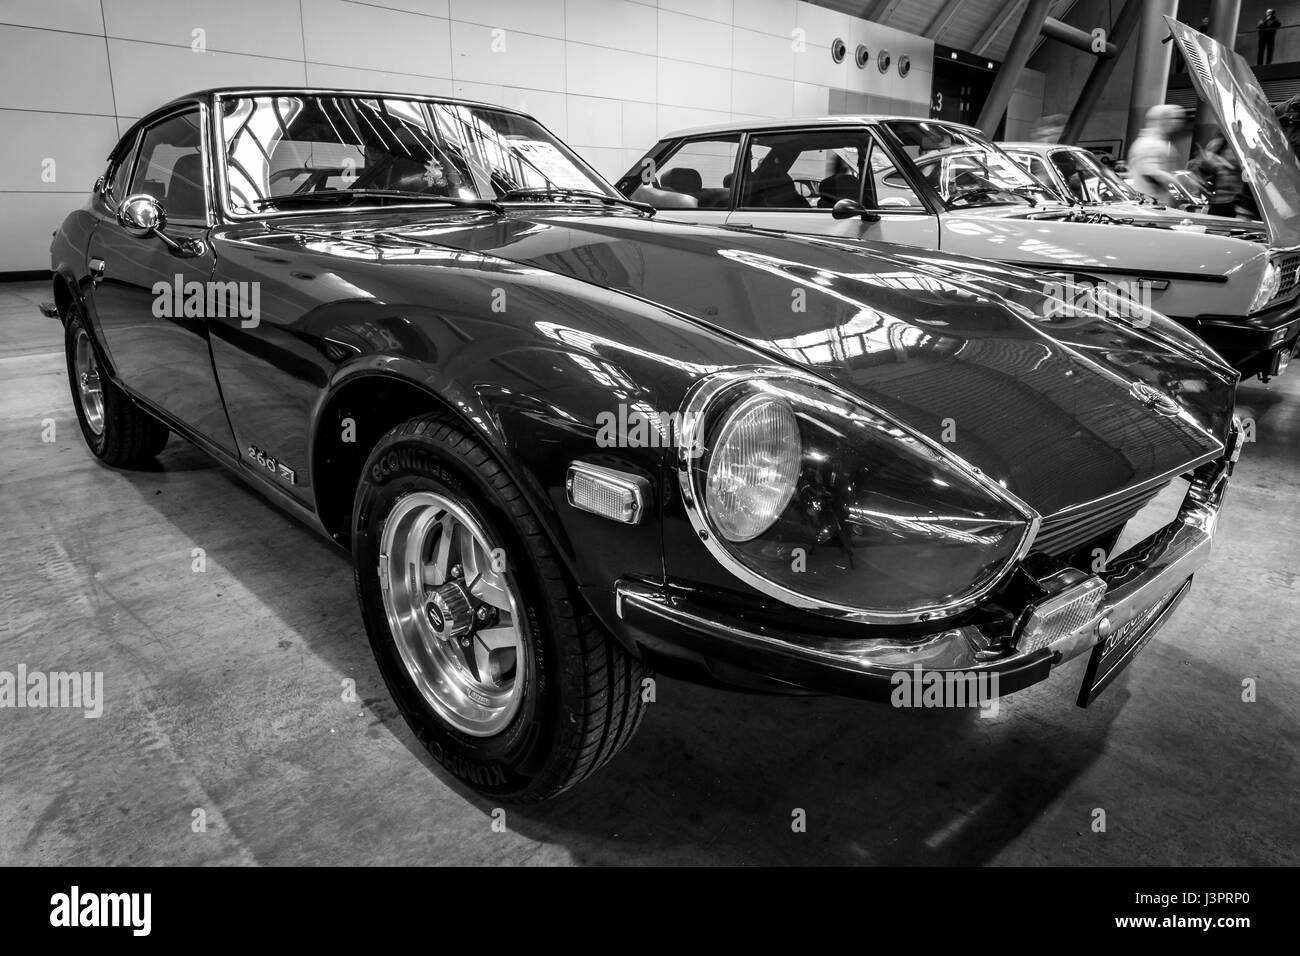 STUTTGART, GERMANY - MARCH 03, 2017: Sports car Datsun 260Z (Nissan S30), 1976. Black and white. Europe's greatest classic car exhibition 'RETRO CLASSICS' Stock Photo